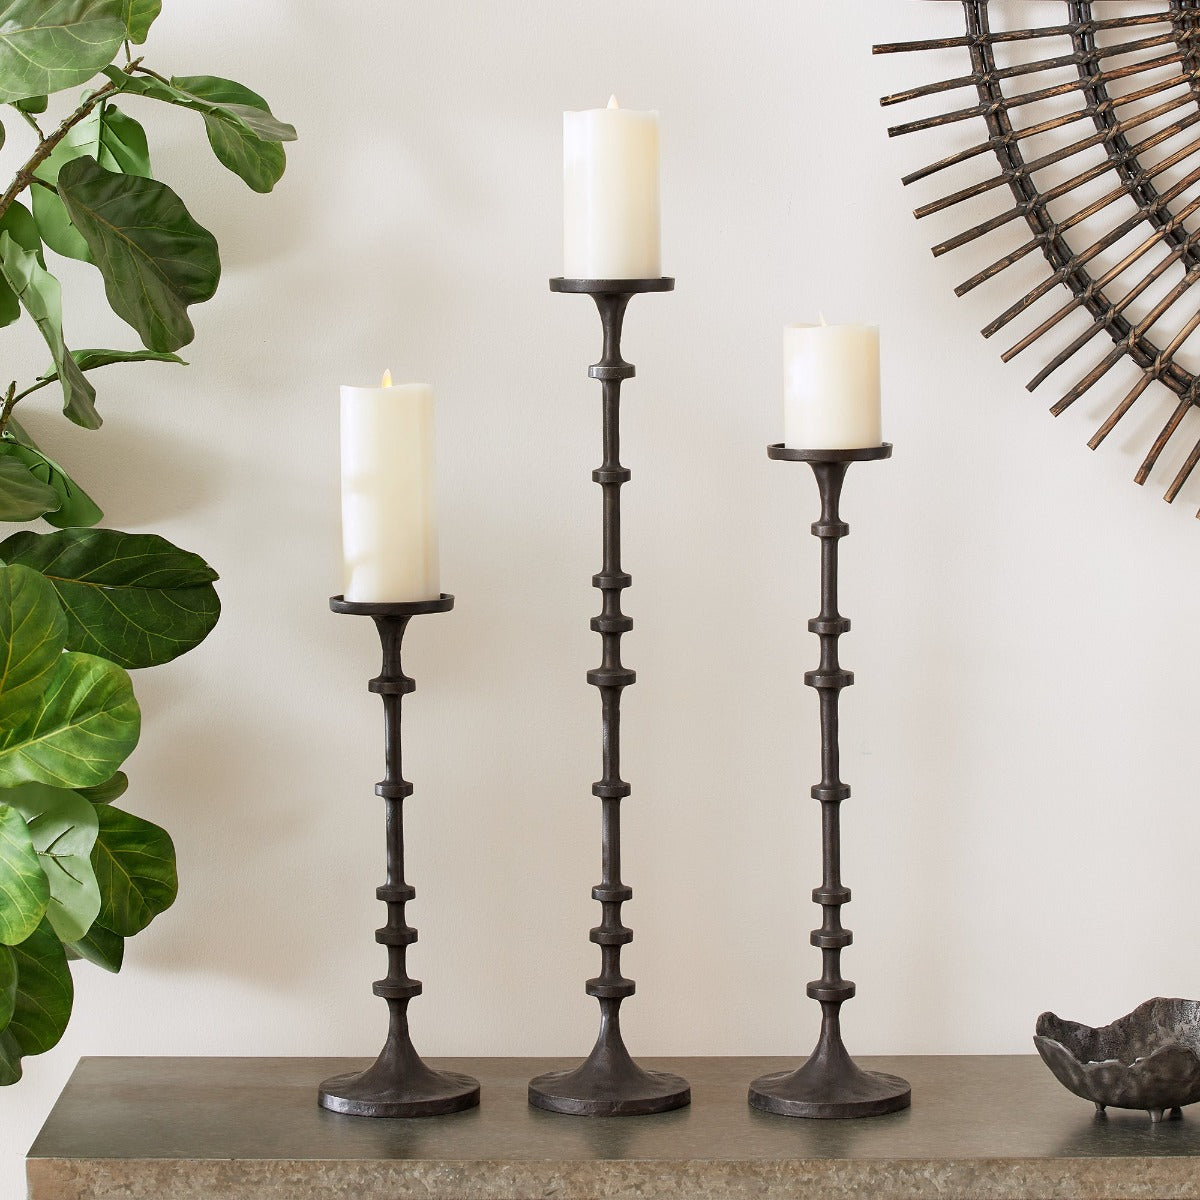 Wrought Iron Candle Holders - Iron Accents